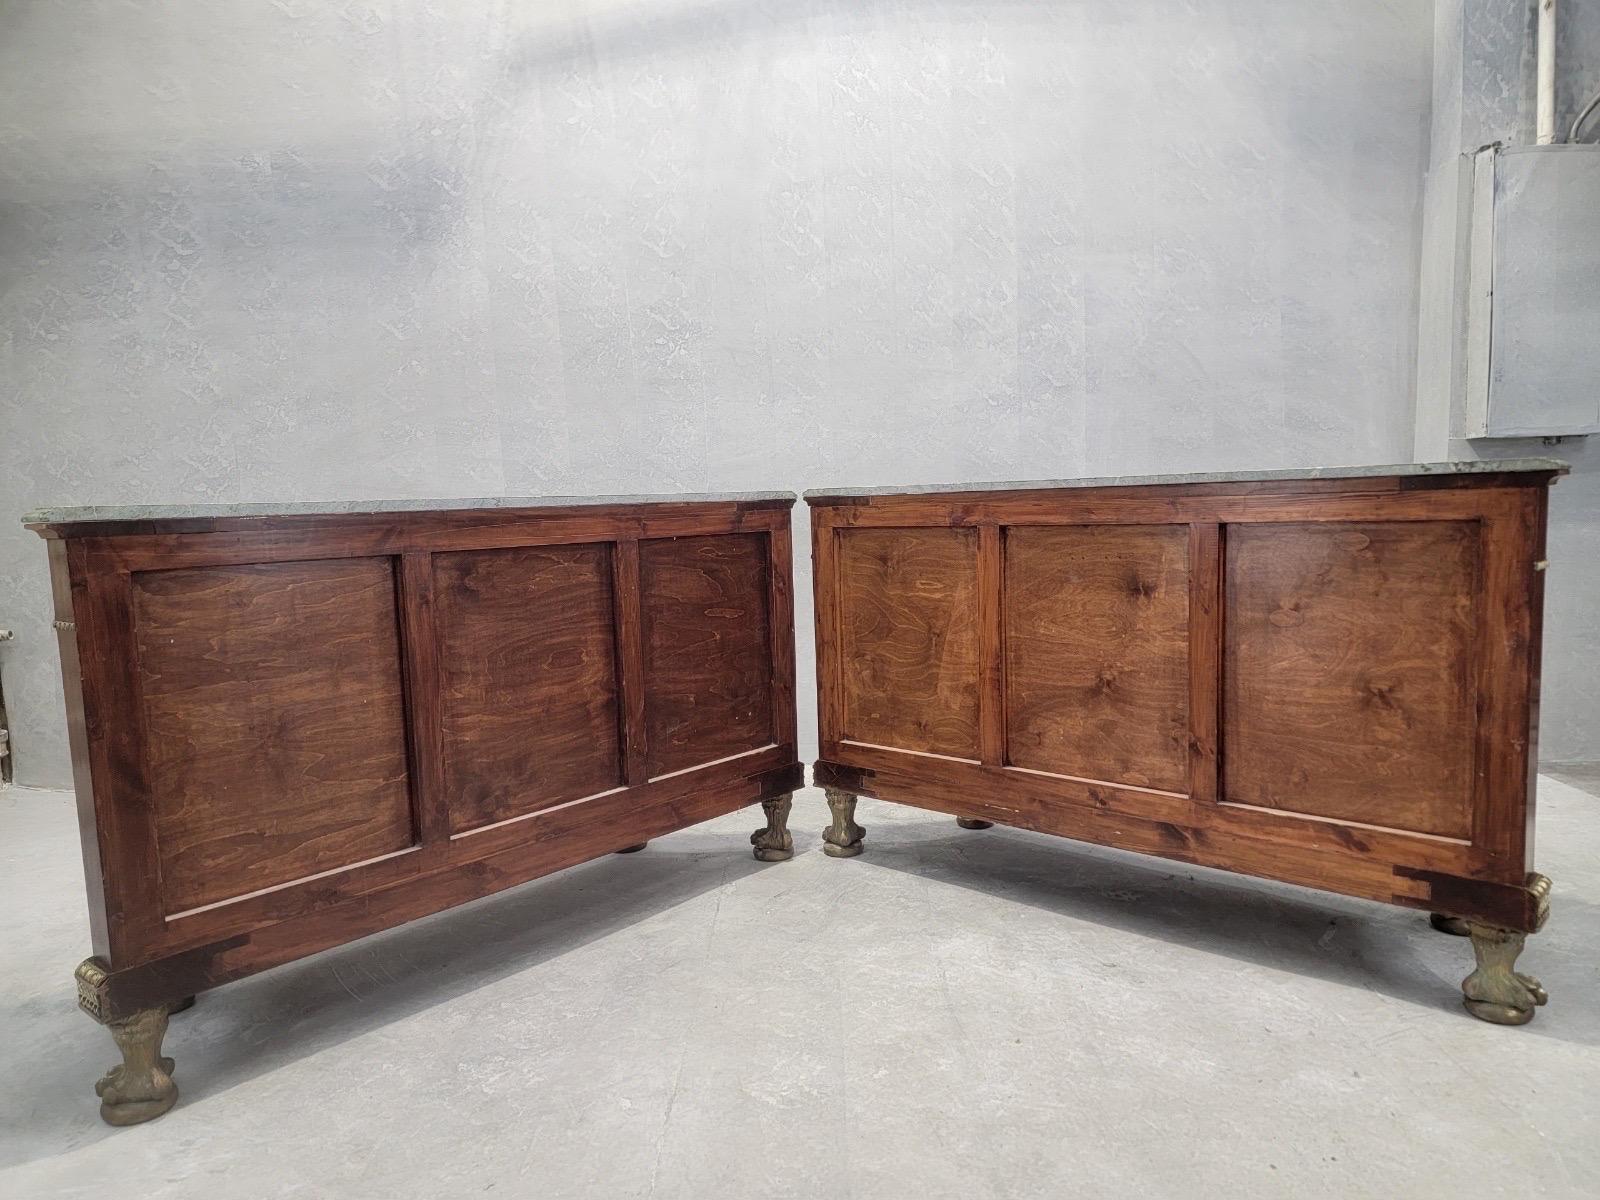 Vintage French Regency Style Brass Ormolu Marble Top Sideboard/Cabinet -Pair In Good Condition For Sale In Chicago, IL